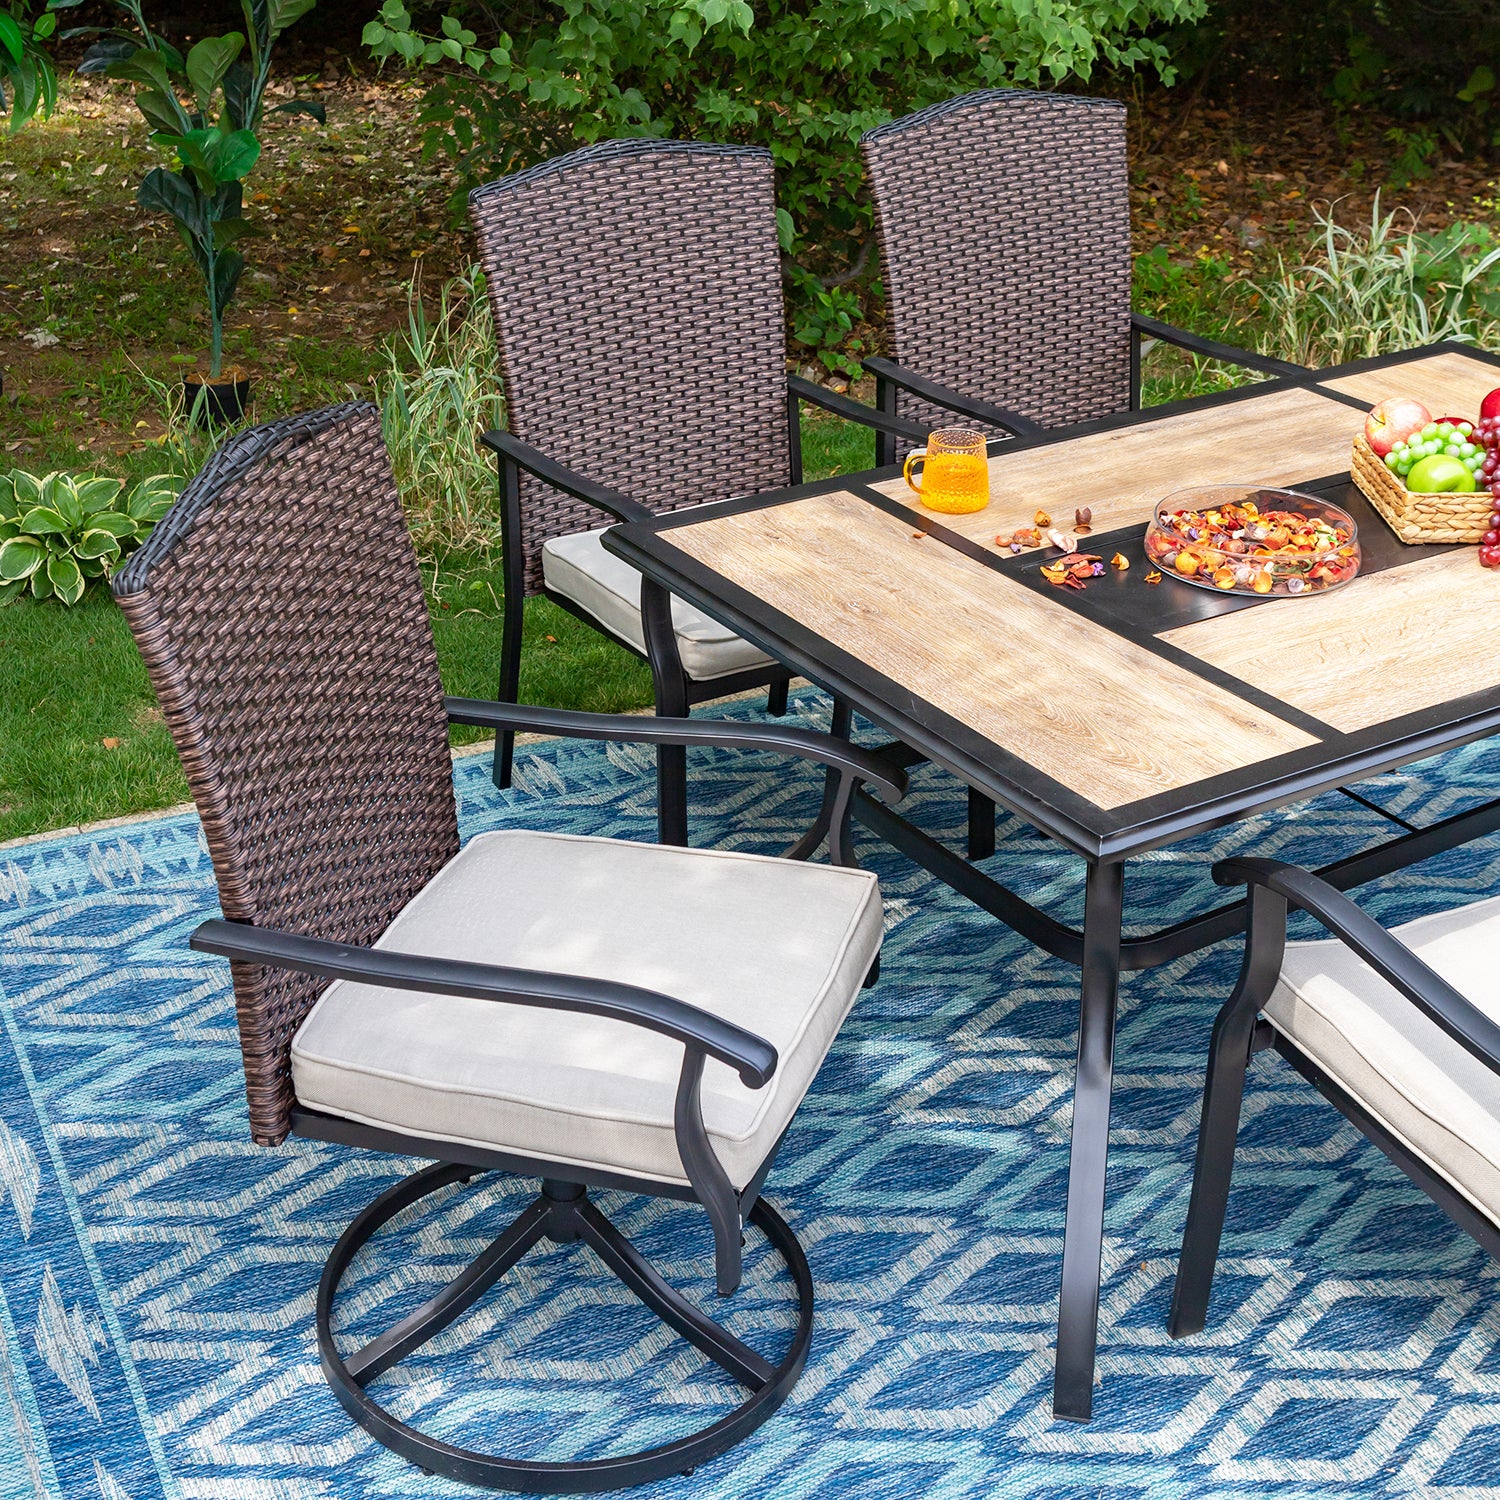 Sophia & William 7-Piece Patio Dining Set Wood-look Stitching Geometric Patterns Table & Rattan Chairs